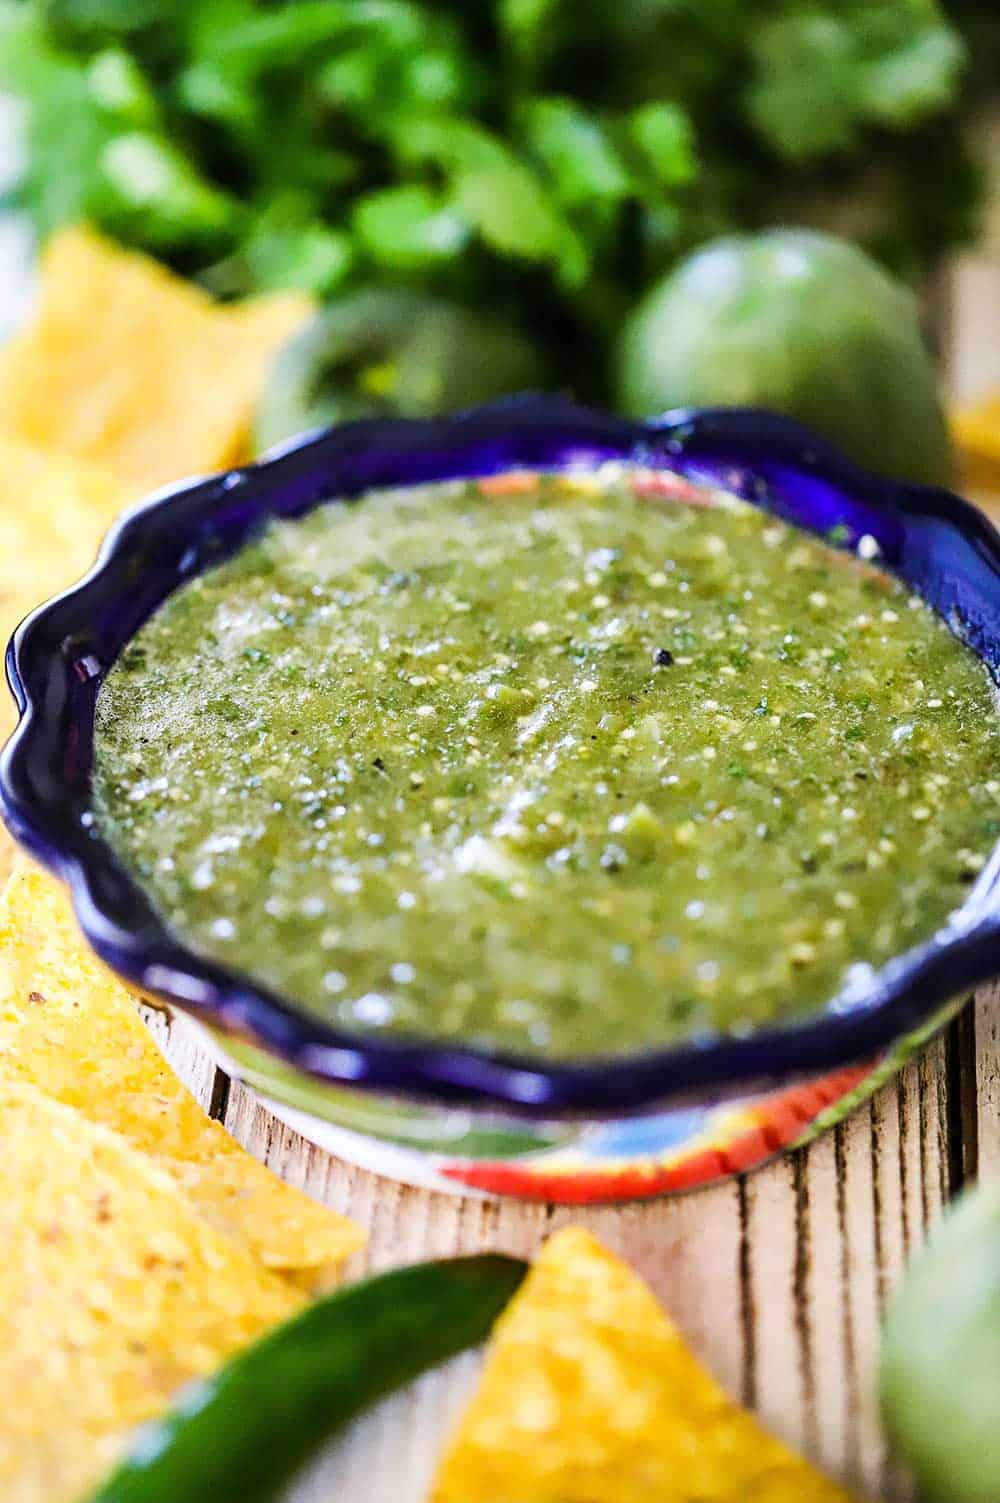 A festive bowl filled with salsa verde and surrounded by corn tortilla chips.